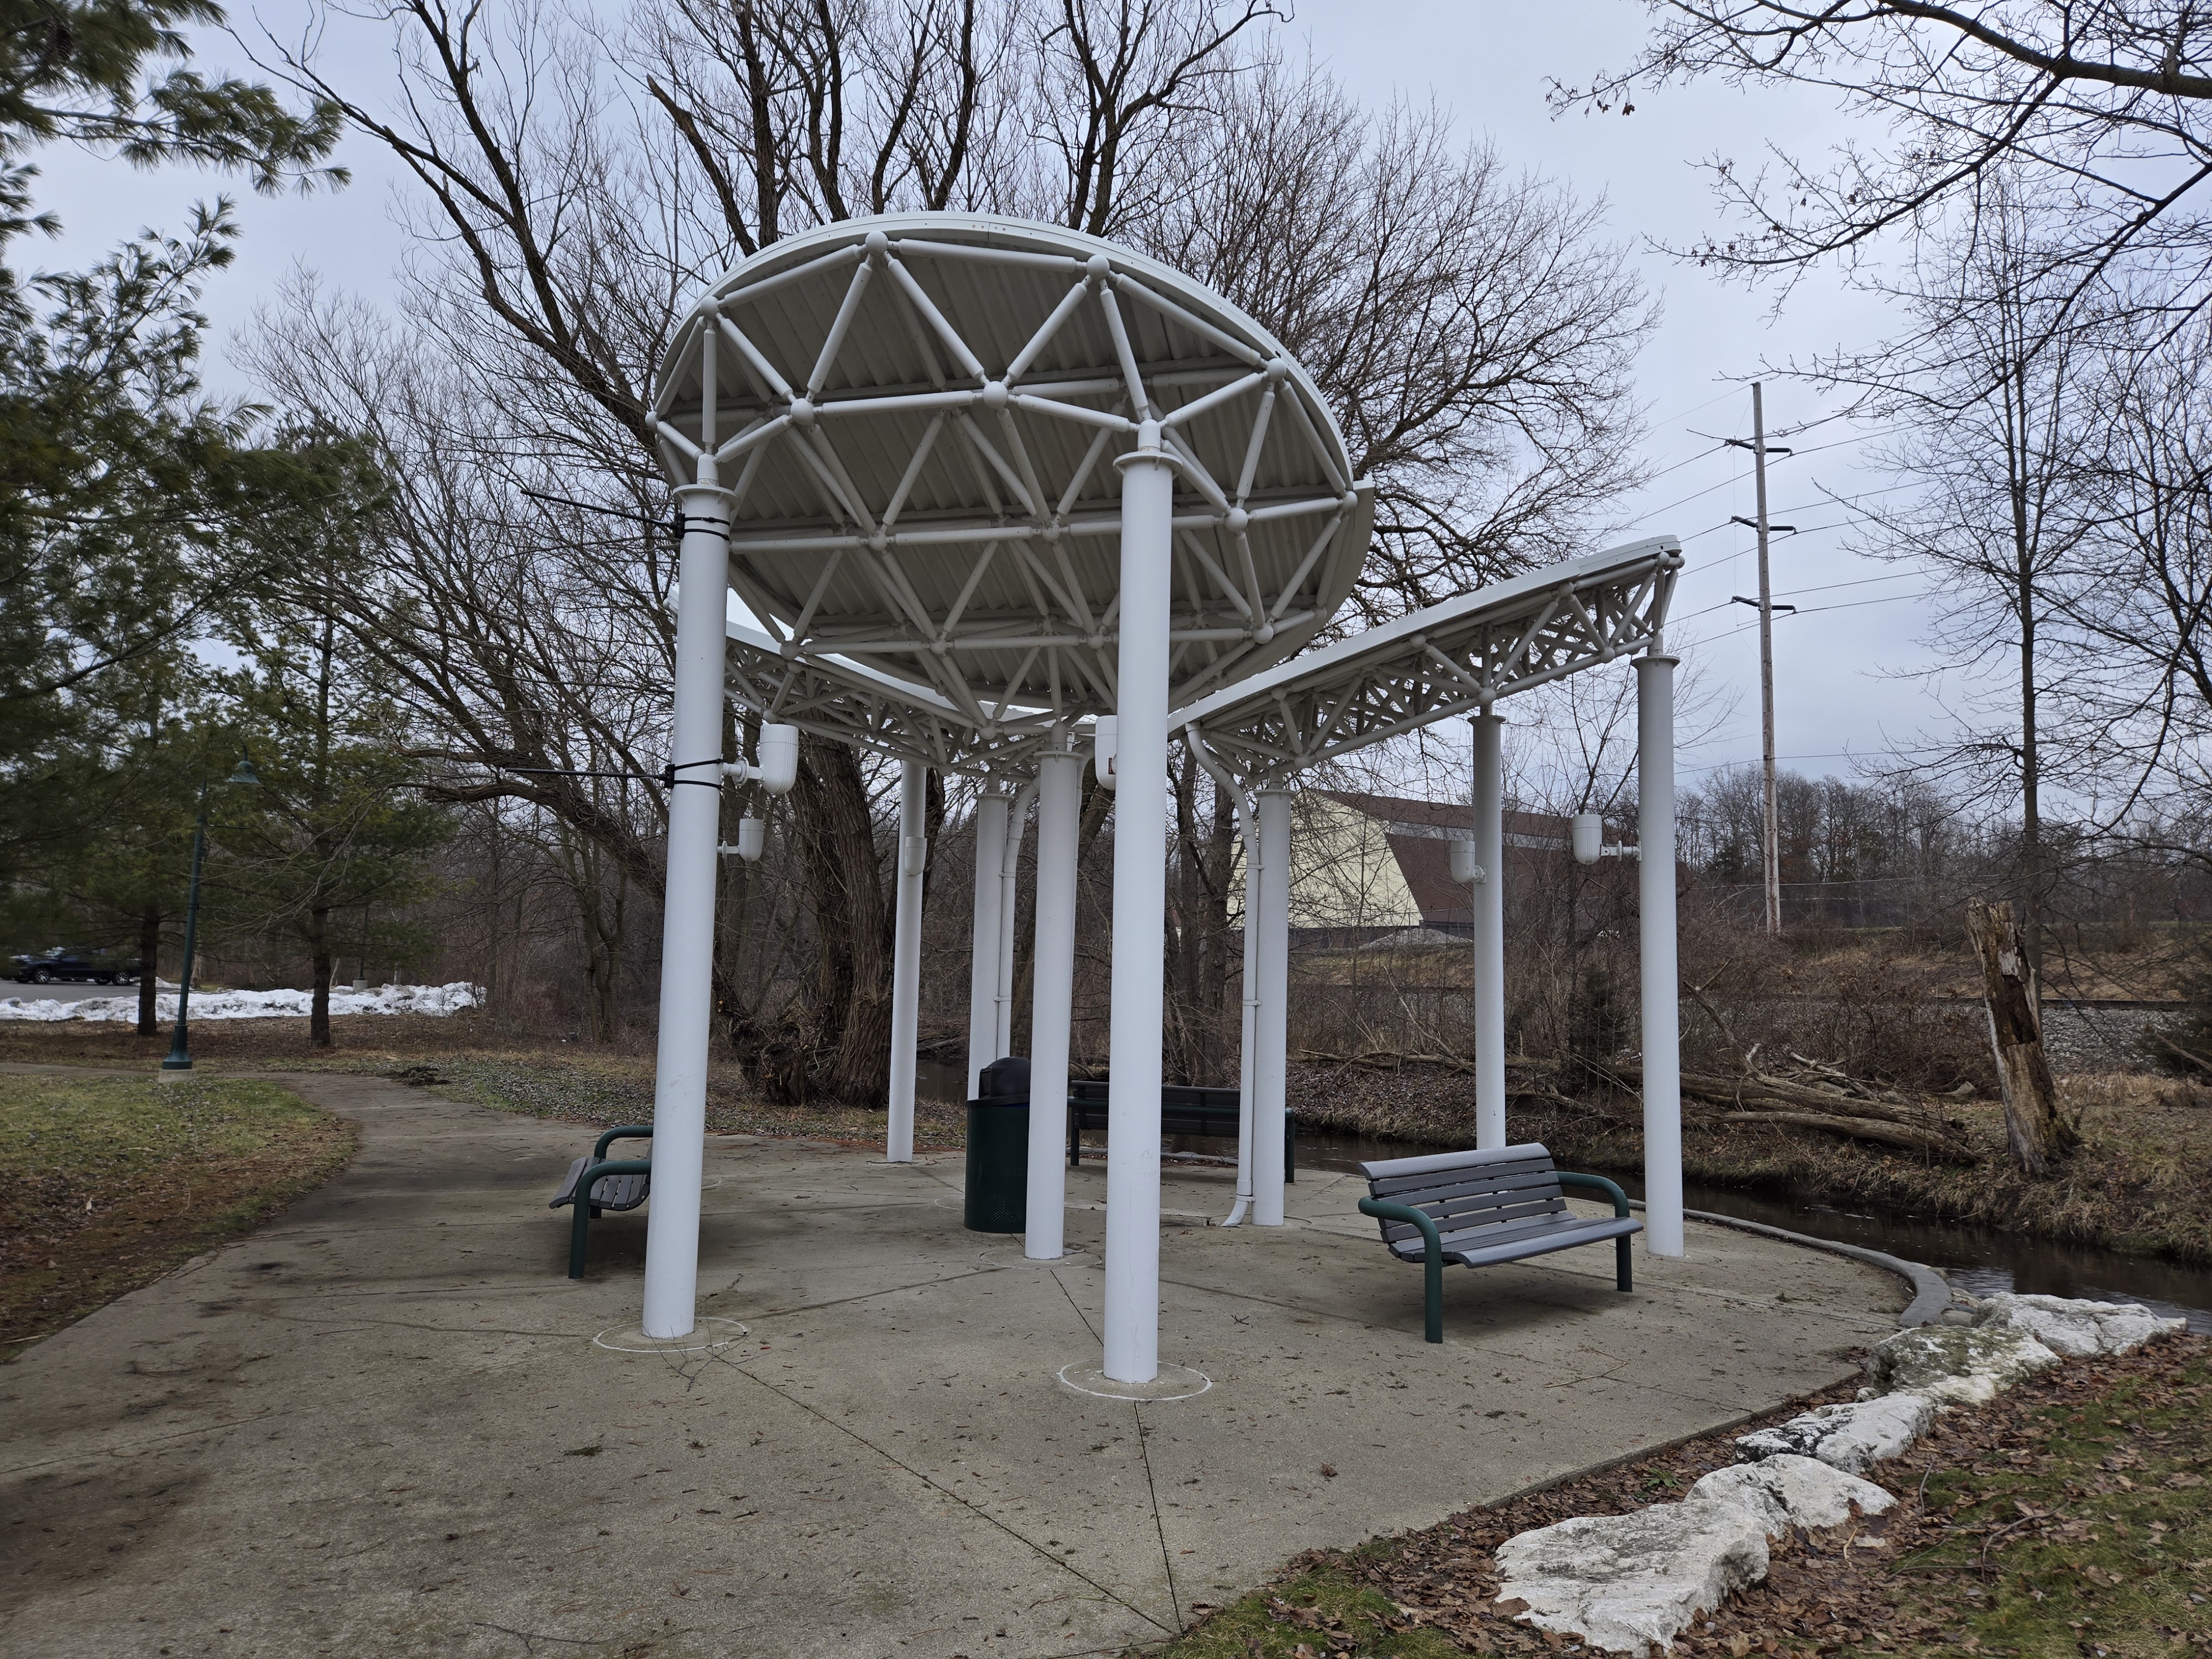 A photo of a structure in a small park.